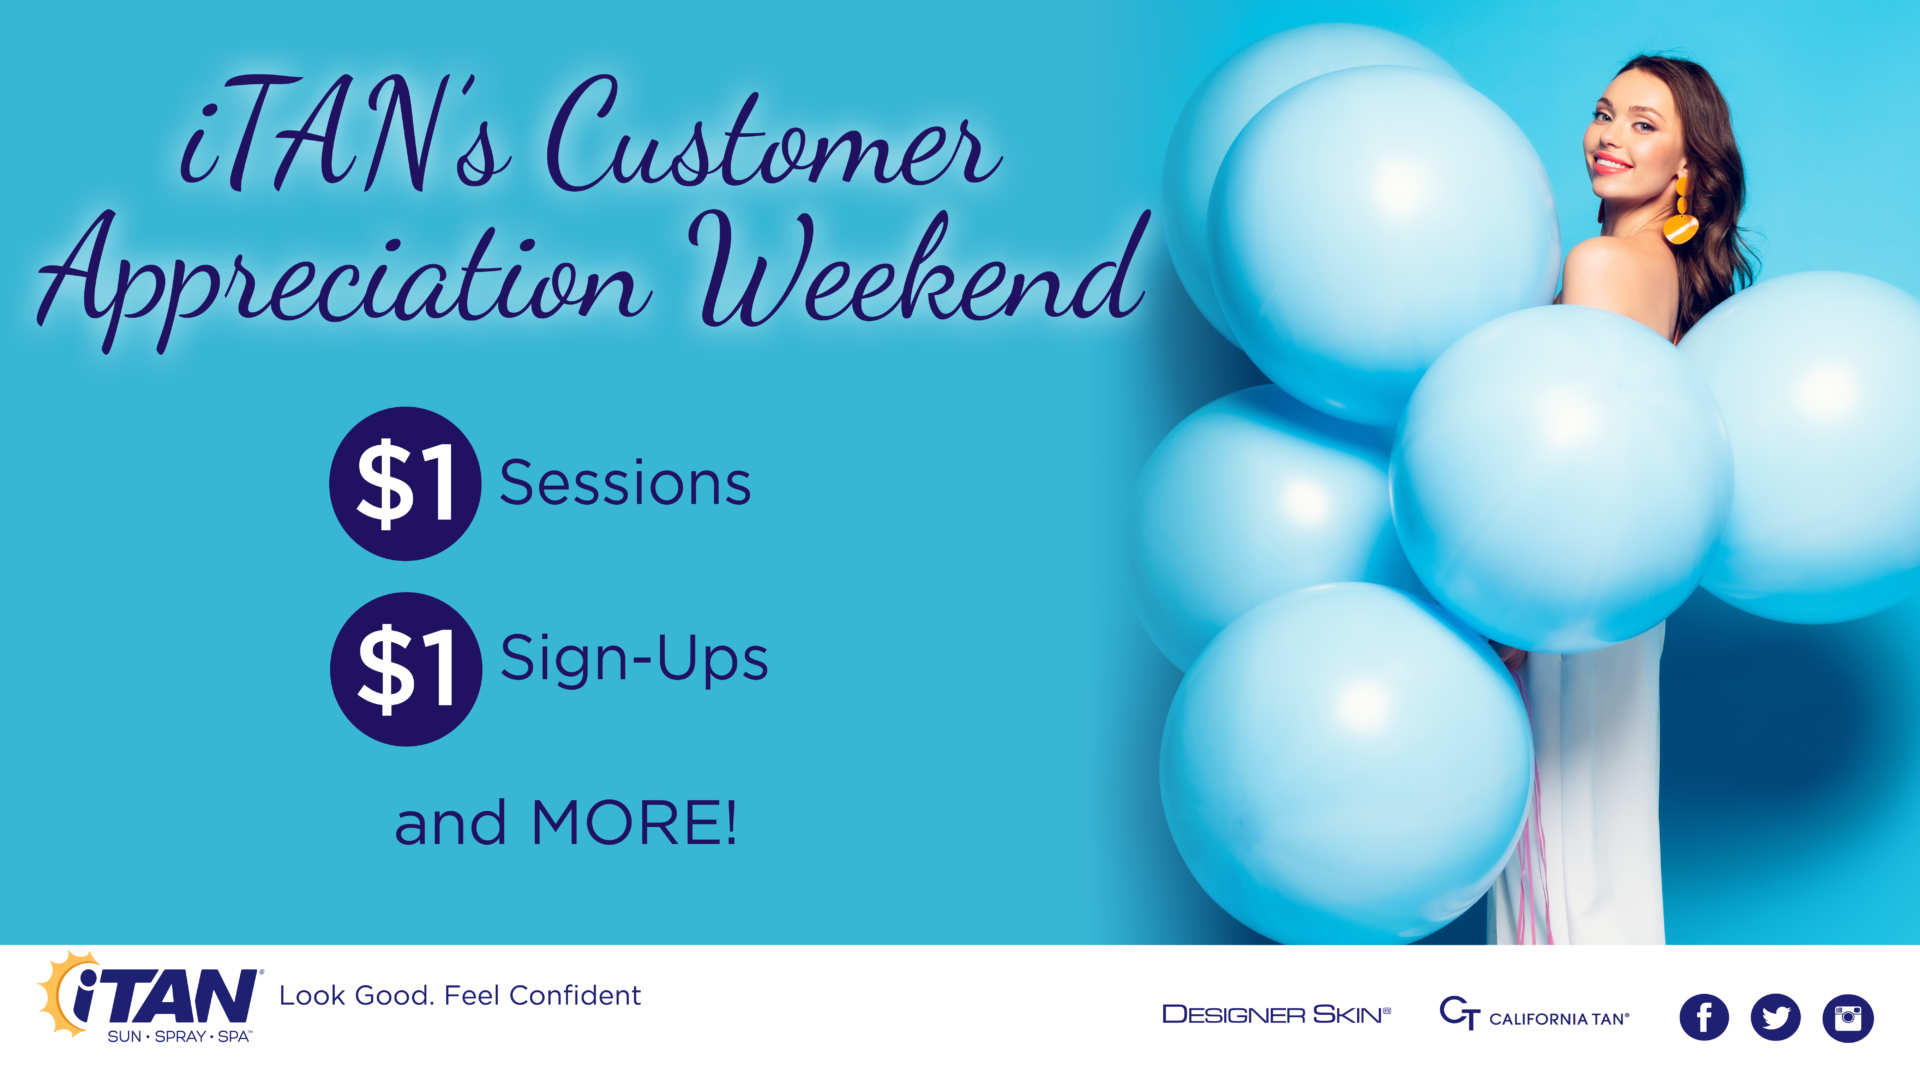 How to Make the Most out of iTAN’s Customer Appreciation Weekend